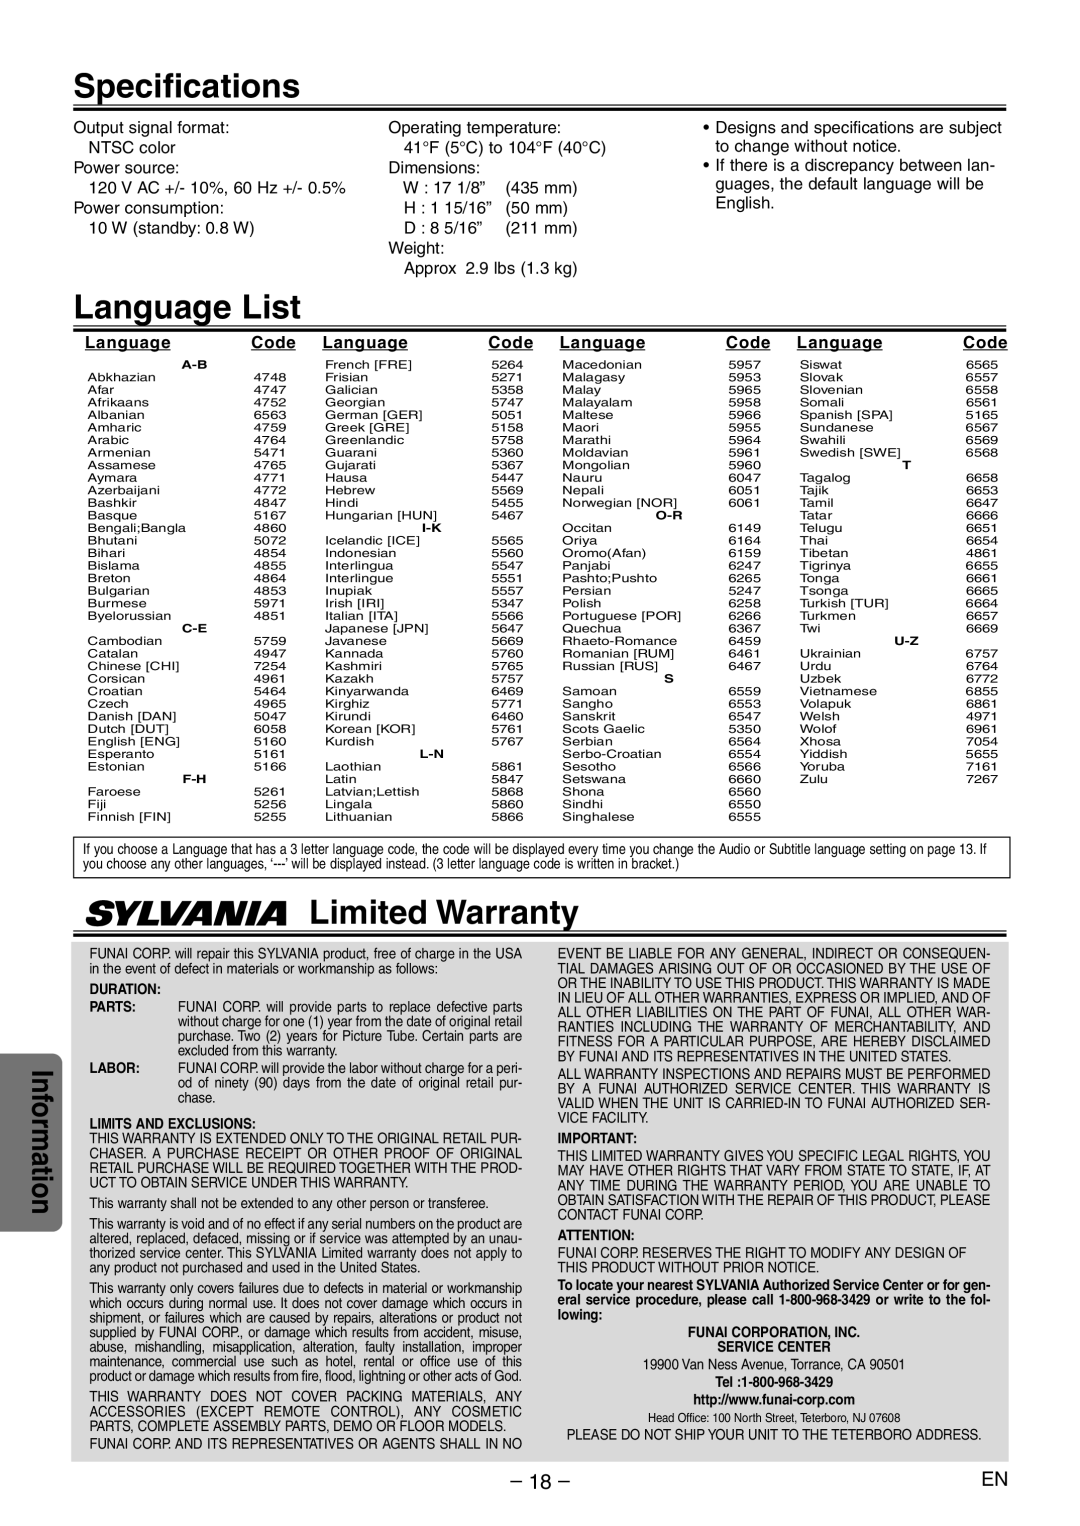 Sylvania DVL100E owner manual Specifications, Language List, Limited Warranty, Information 